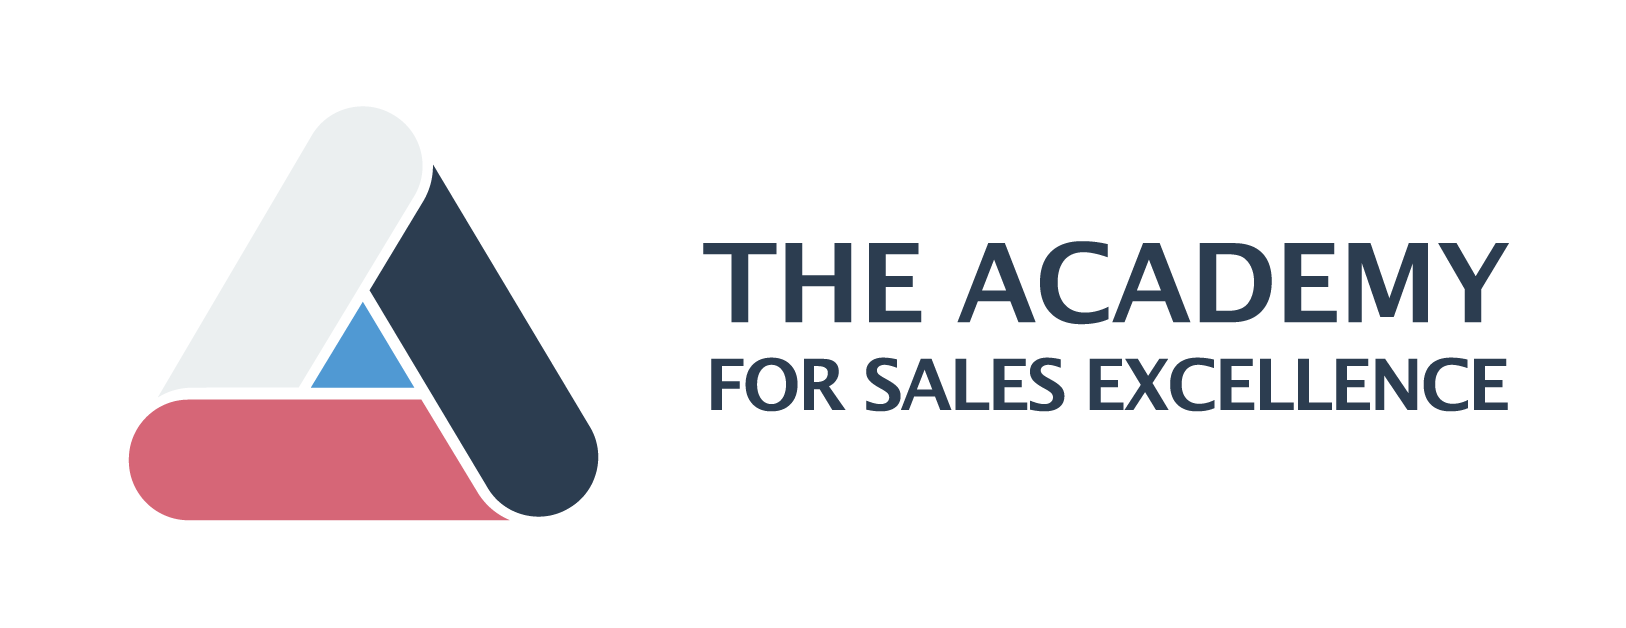 The Academy for Sales